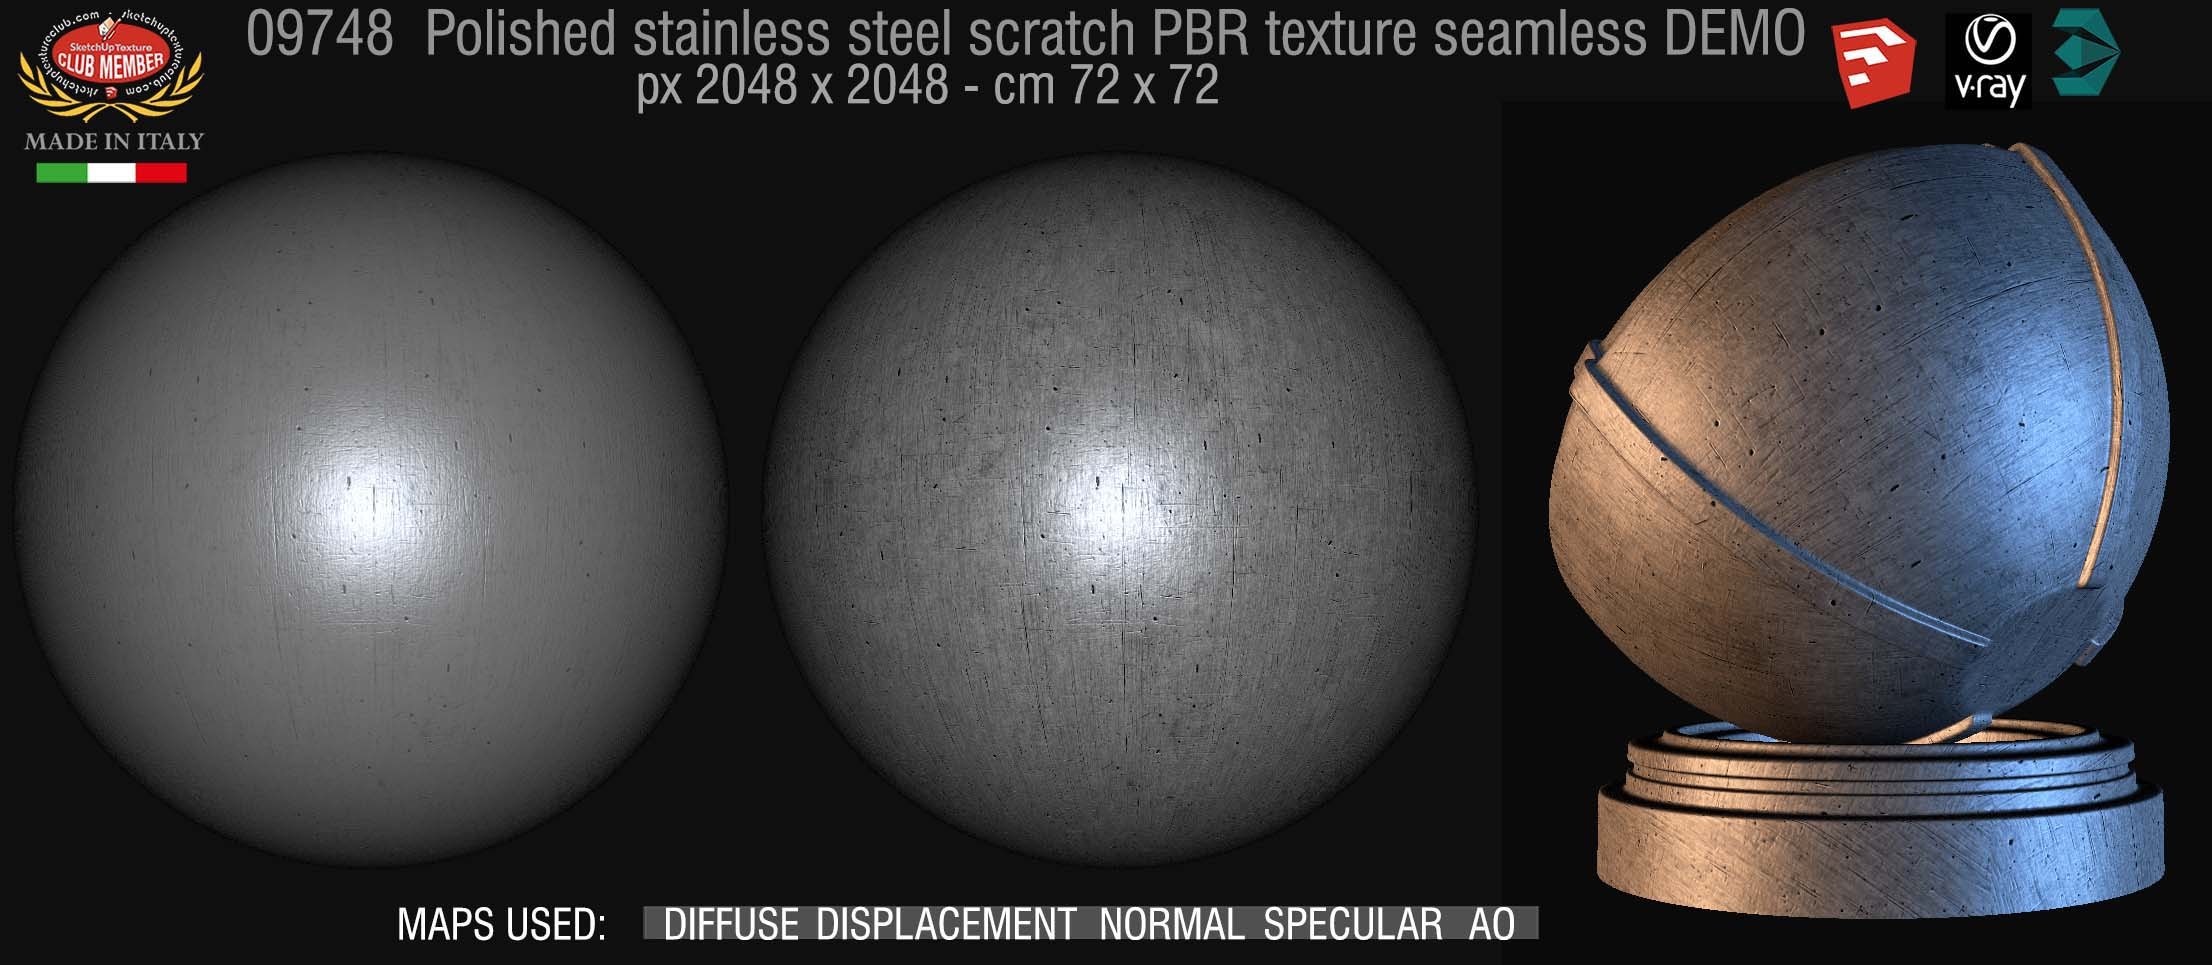 09748 Polished stainless steel scratch metal PBR texture seamless DEMO